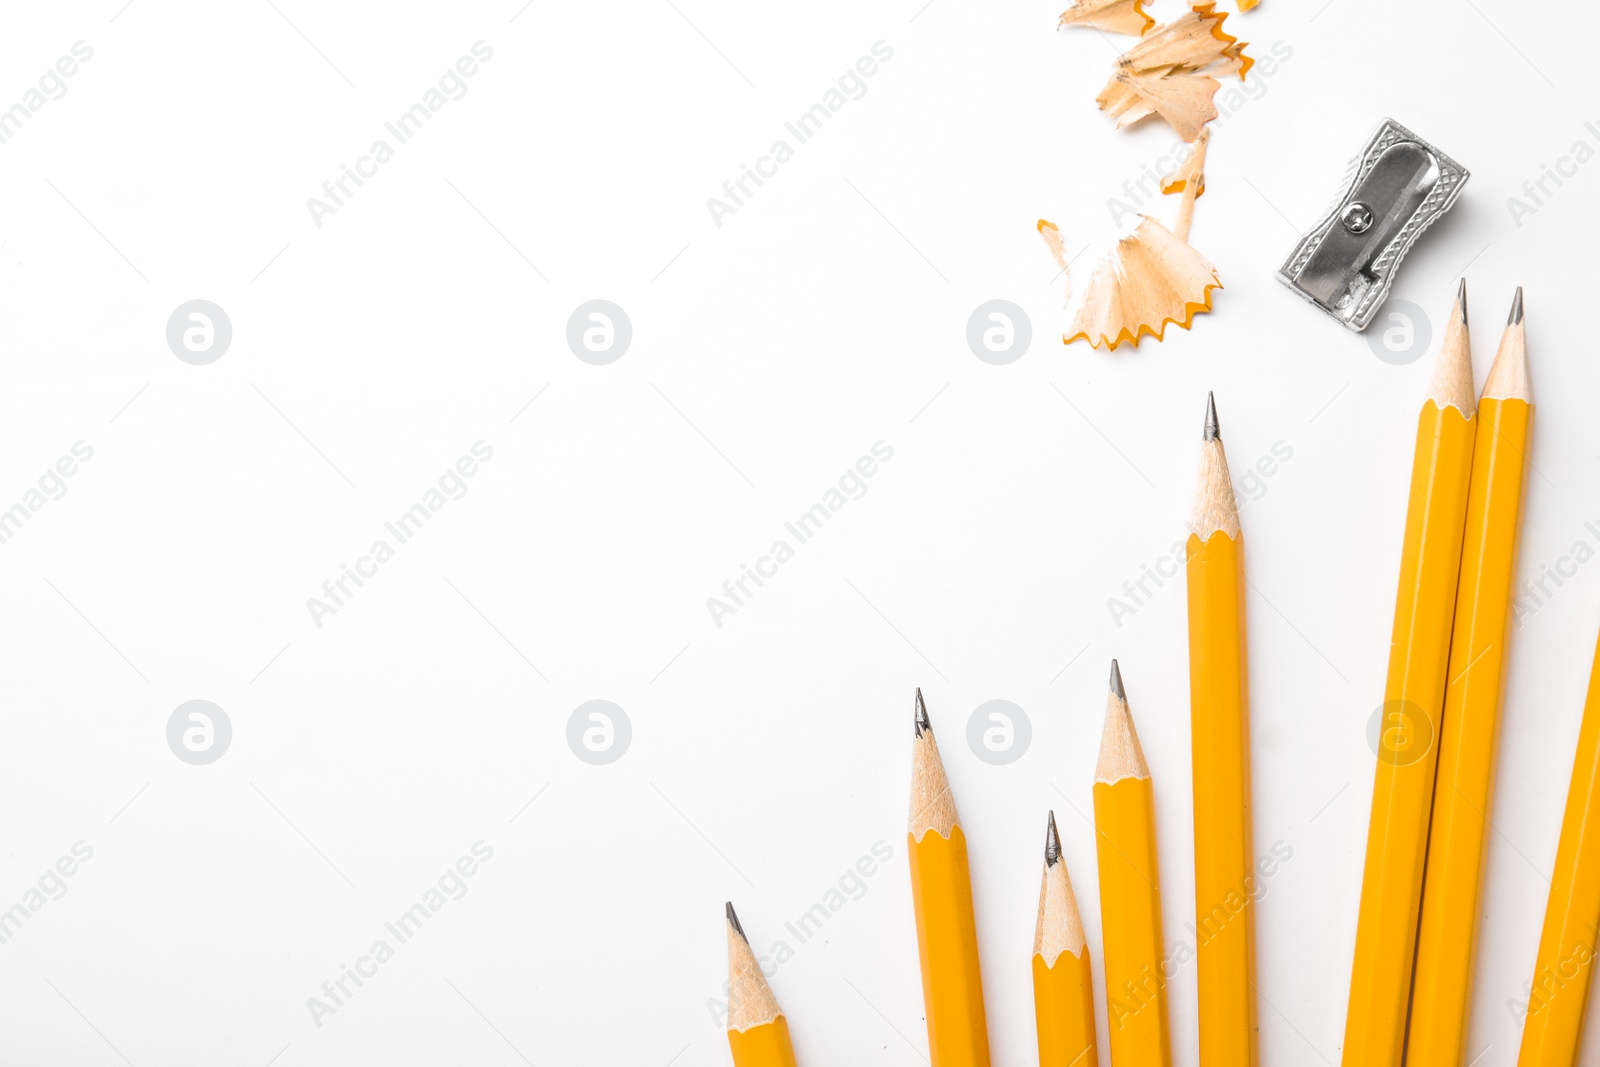 Photo of Graphite pencils, shavings and sharpener on white background, top view. Space for text